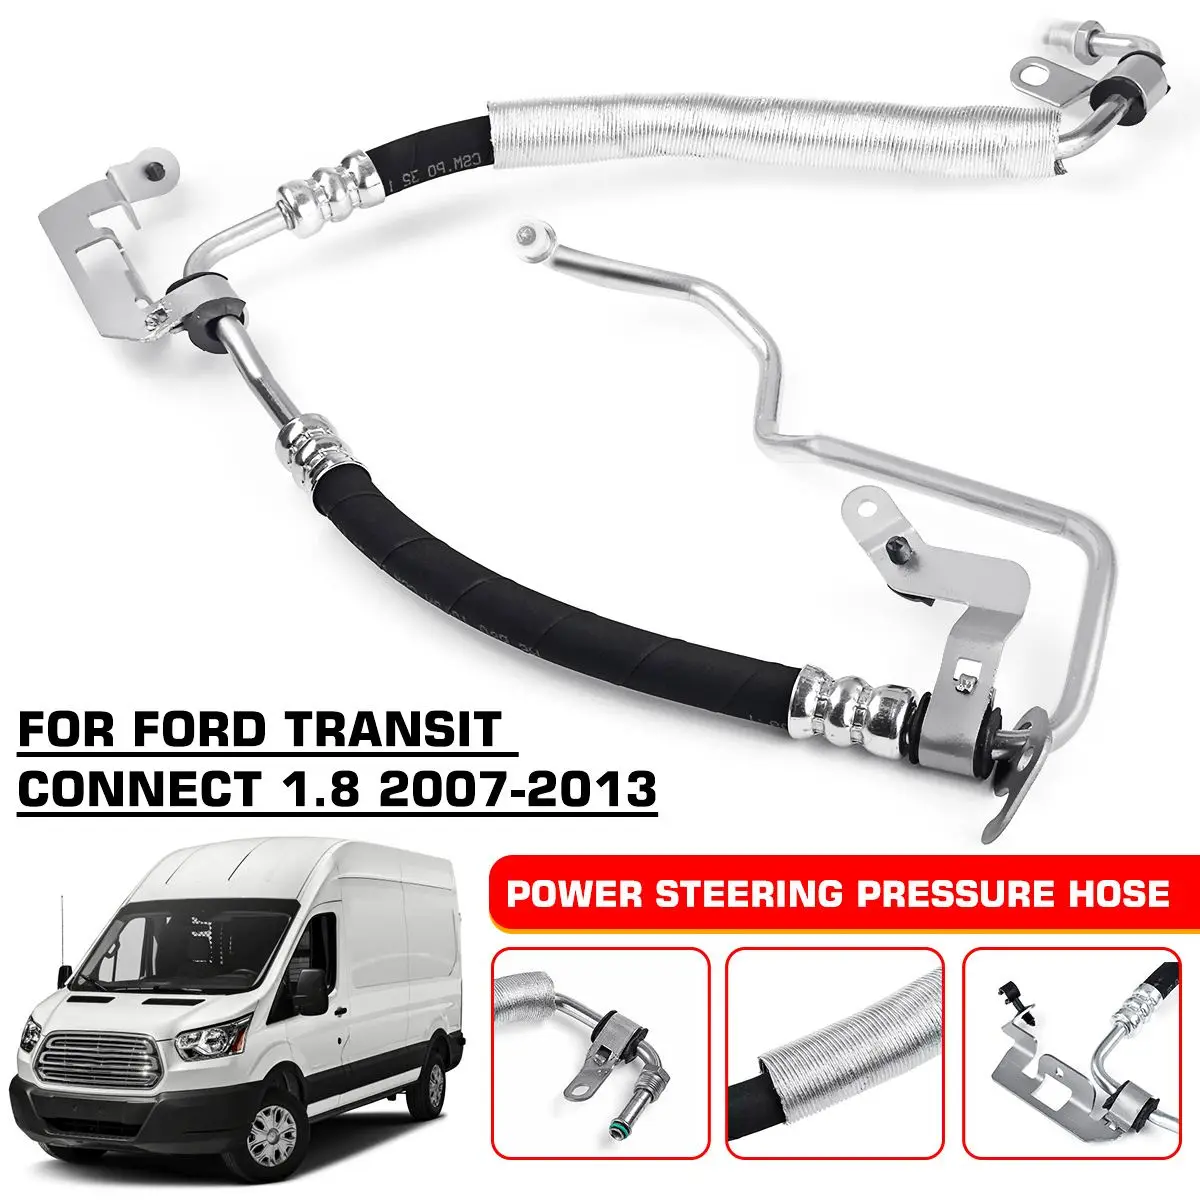 

5231495 Power Steering High Pressure Hose Assembly For Ford Transit Connect 2007-2013 Car Accessories 5149302 5046265 5041278